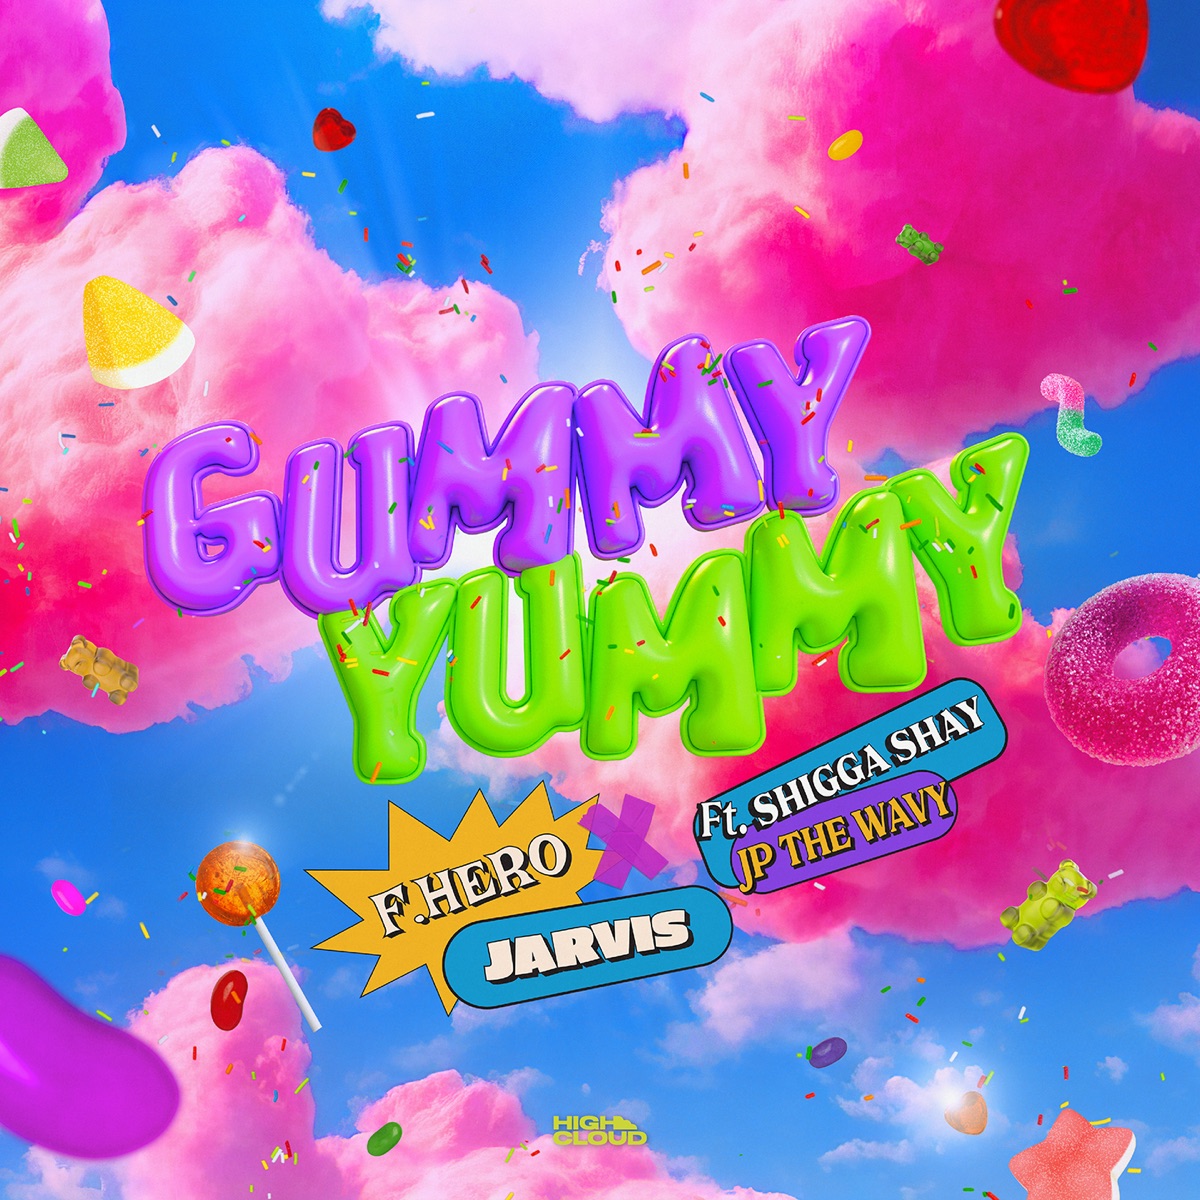 Cover art for『F.HERO x JARVIS - GUMMY YUMMY (feat. ShiGGa Shay & JP THE WAVY)』from the release『GUMMY YUMMY (feat. ShiGGa Shay & JP THE WAVY)』